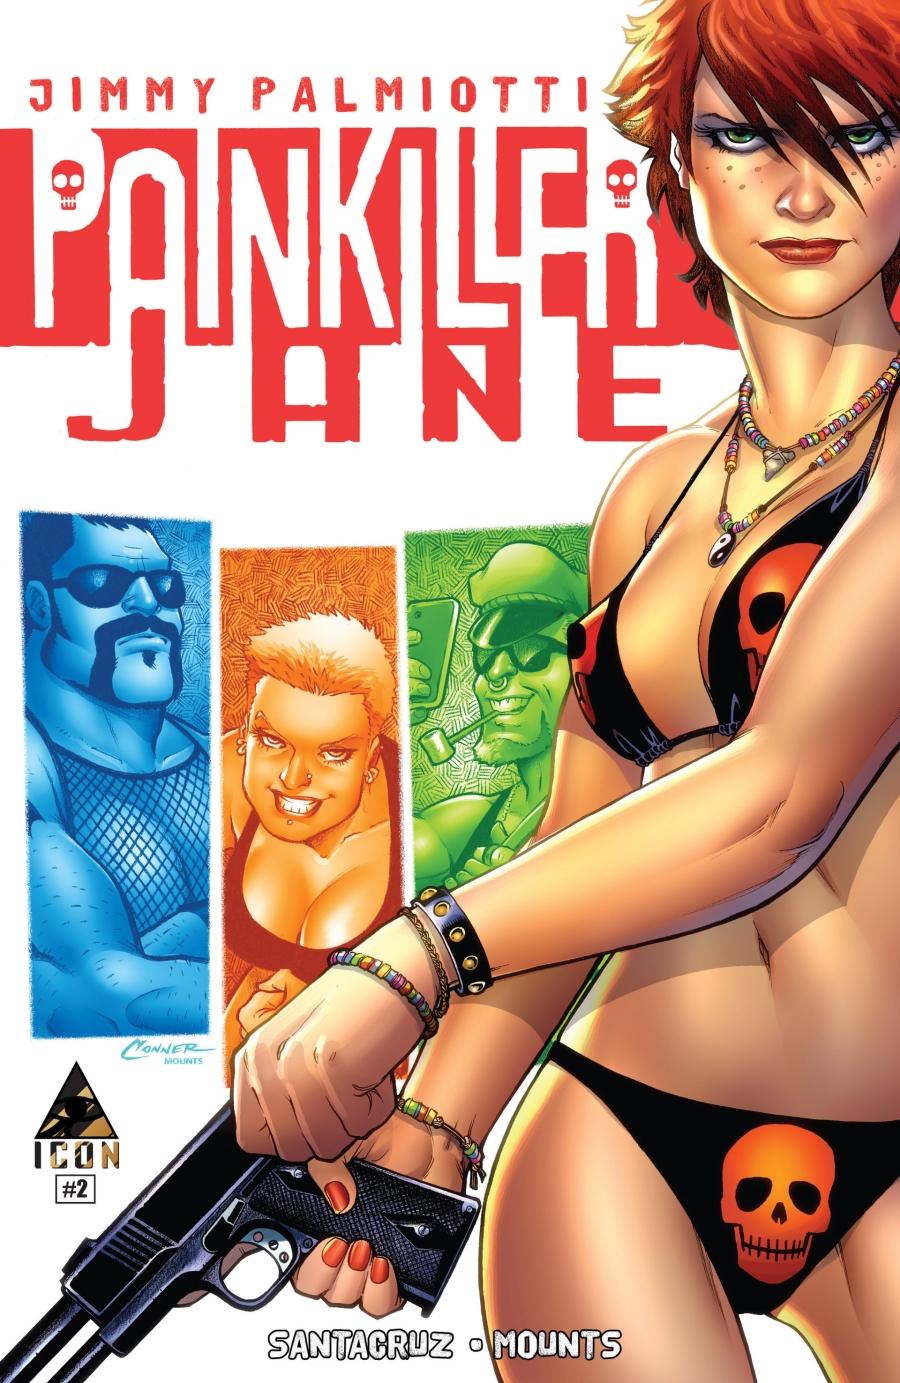 Painkiller Jane: The Price of Freedom Vol. 1 #2